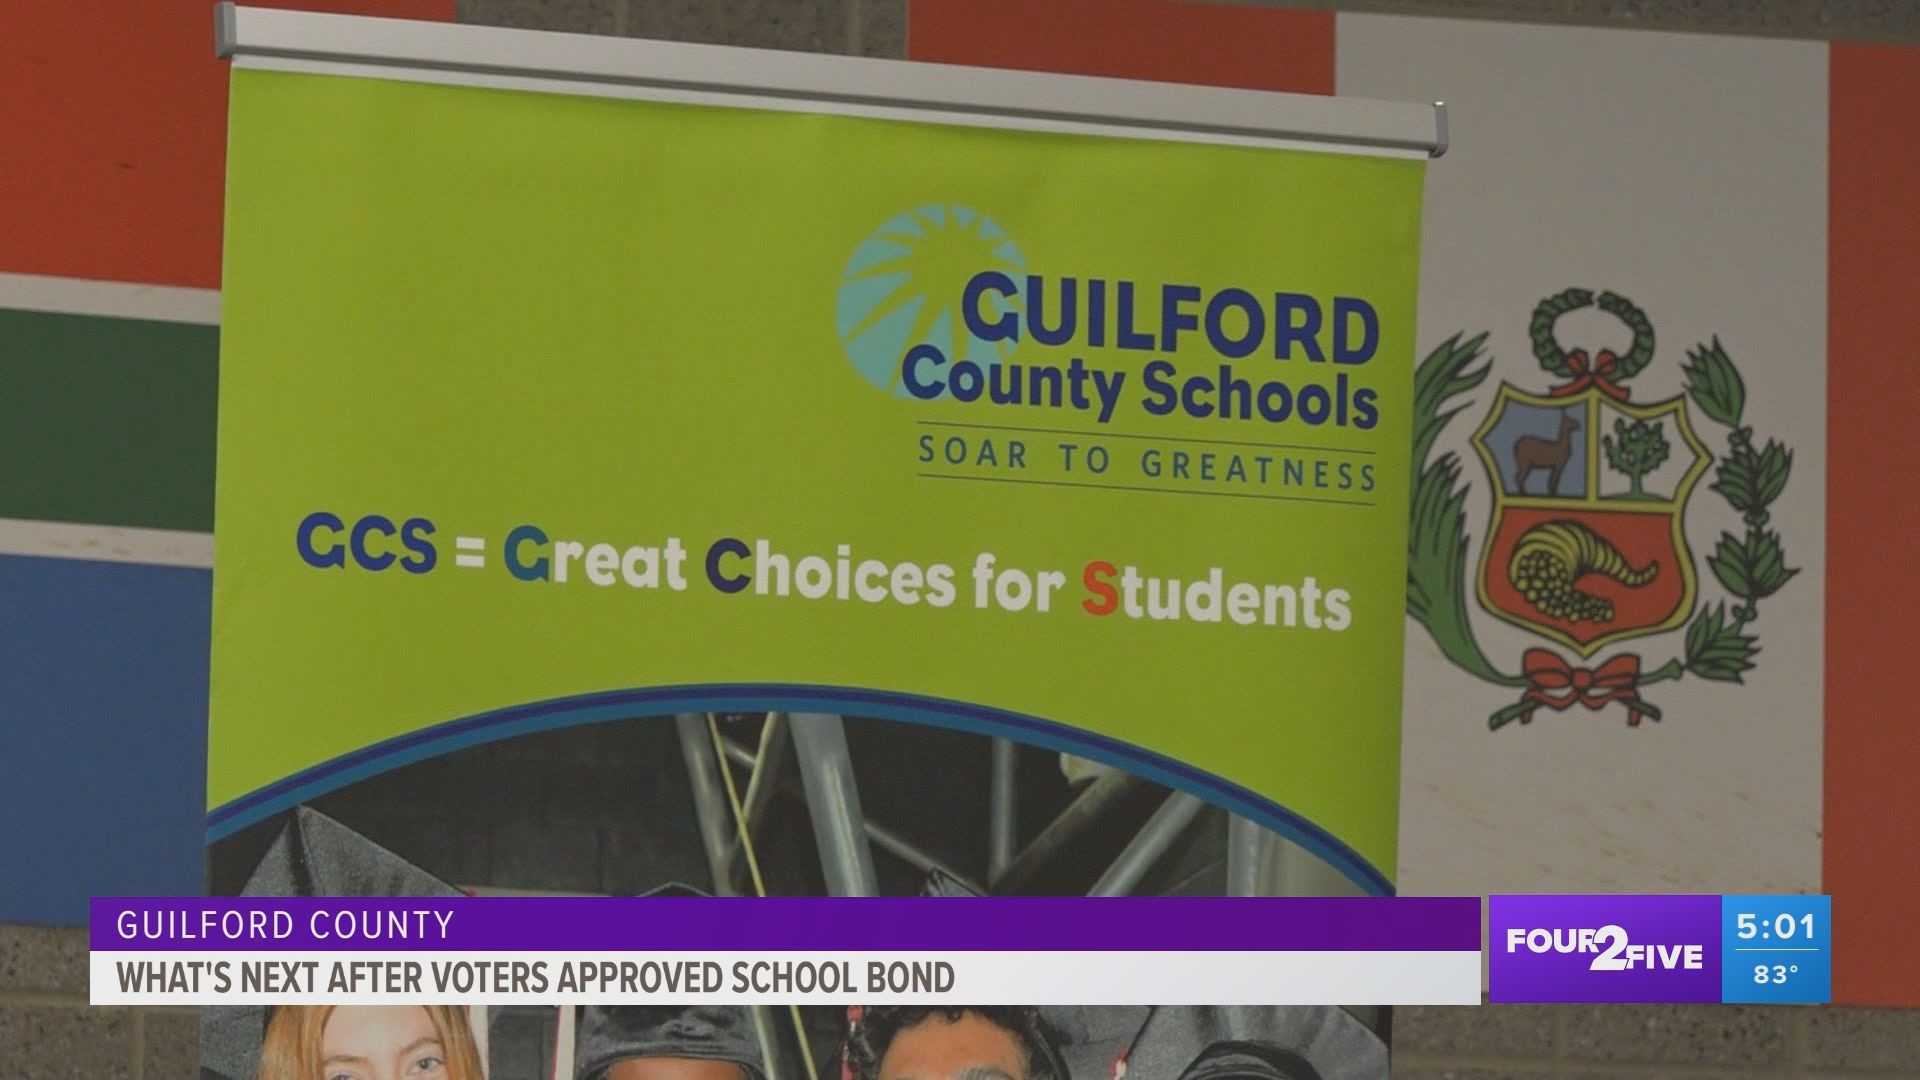 Guilford County taxpayers voted to pass a $1.7 billion bond to make upgrades and repairs to Guilford County Schools.